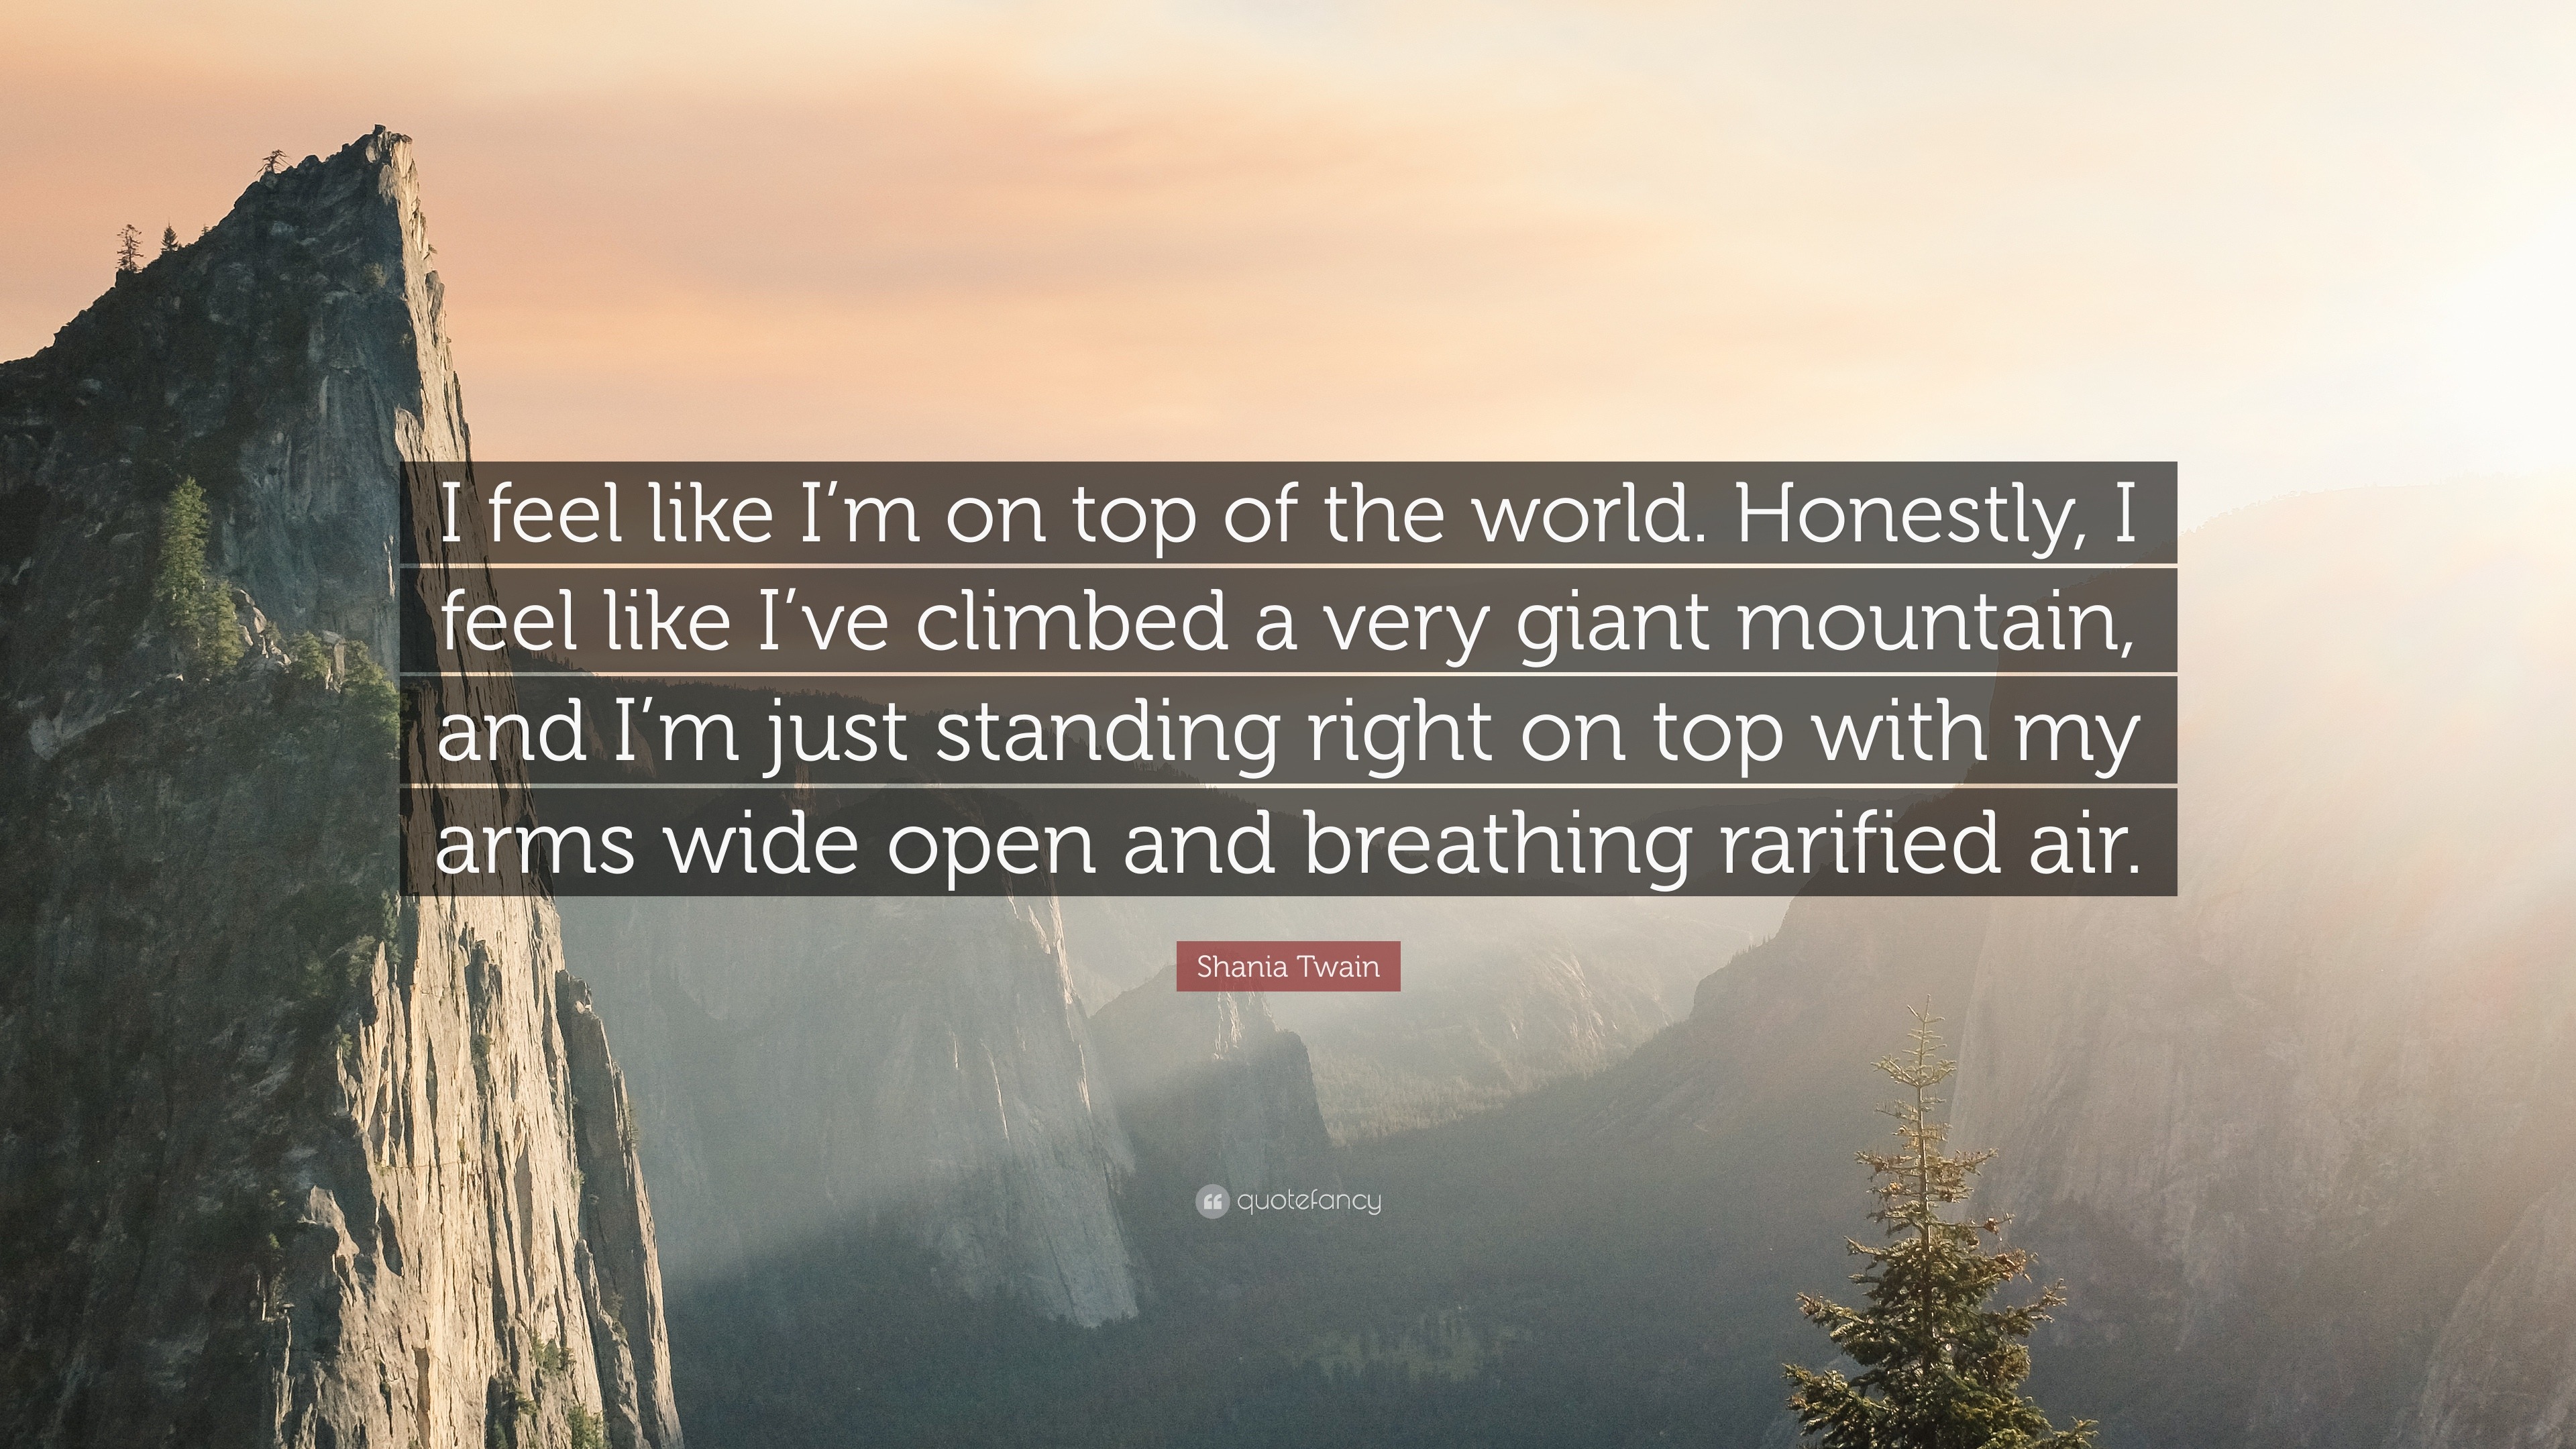 Shania Twain Quote: “I feel like I'm on top the world. Honestly, I feel like I've climbed a very giant mountain, and I'm just standing rig...”